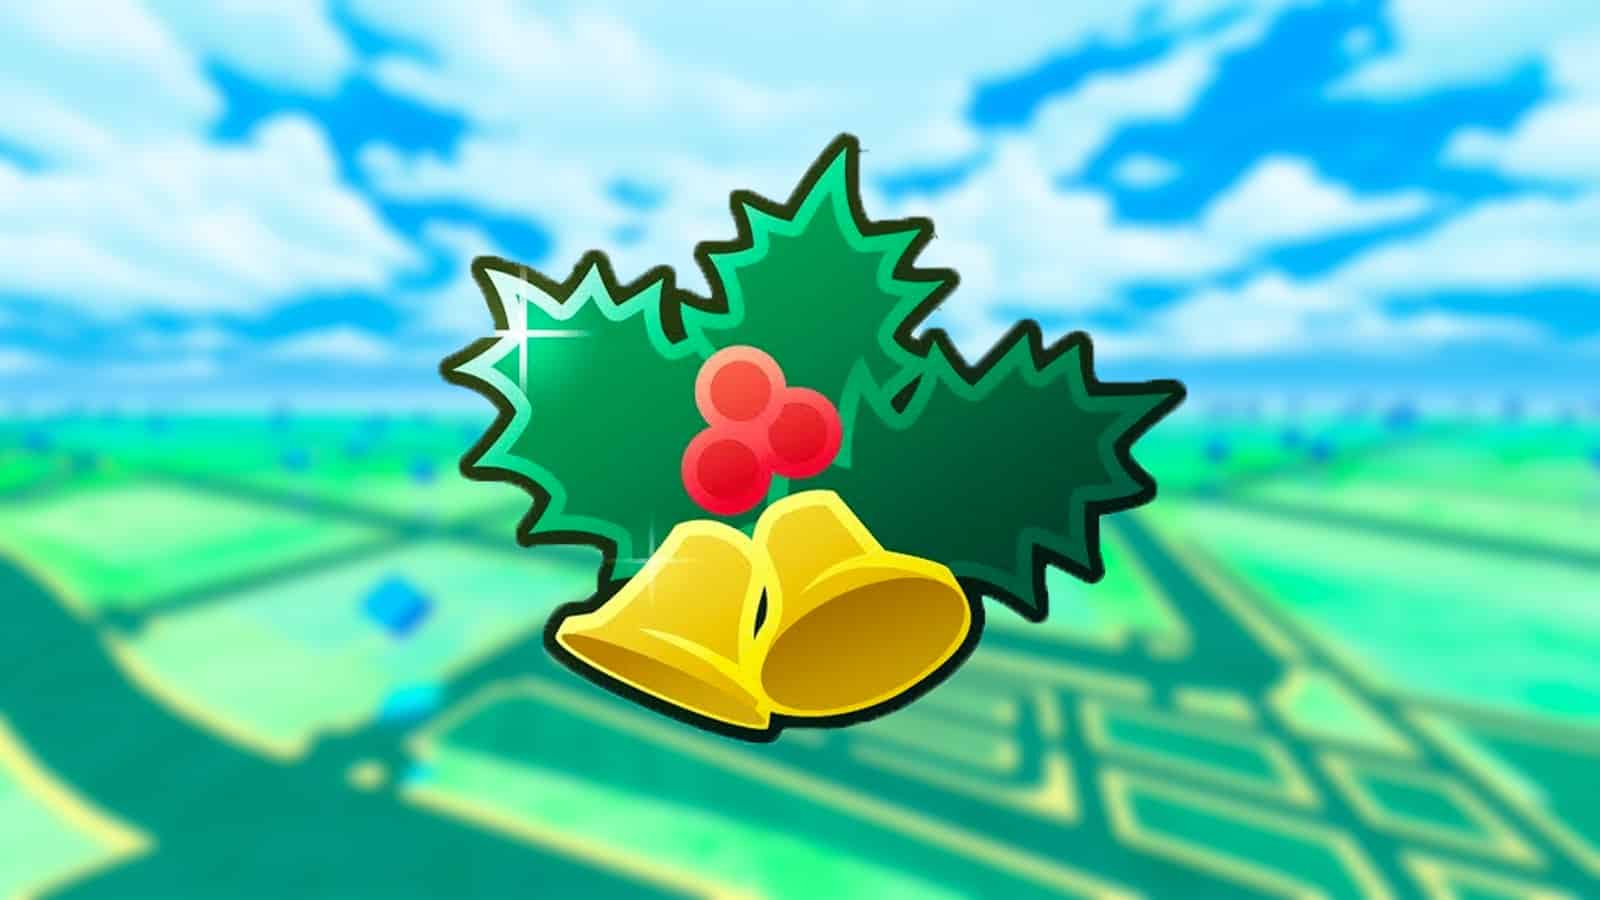 The Holiday Cup logo in Pokemon Go